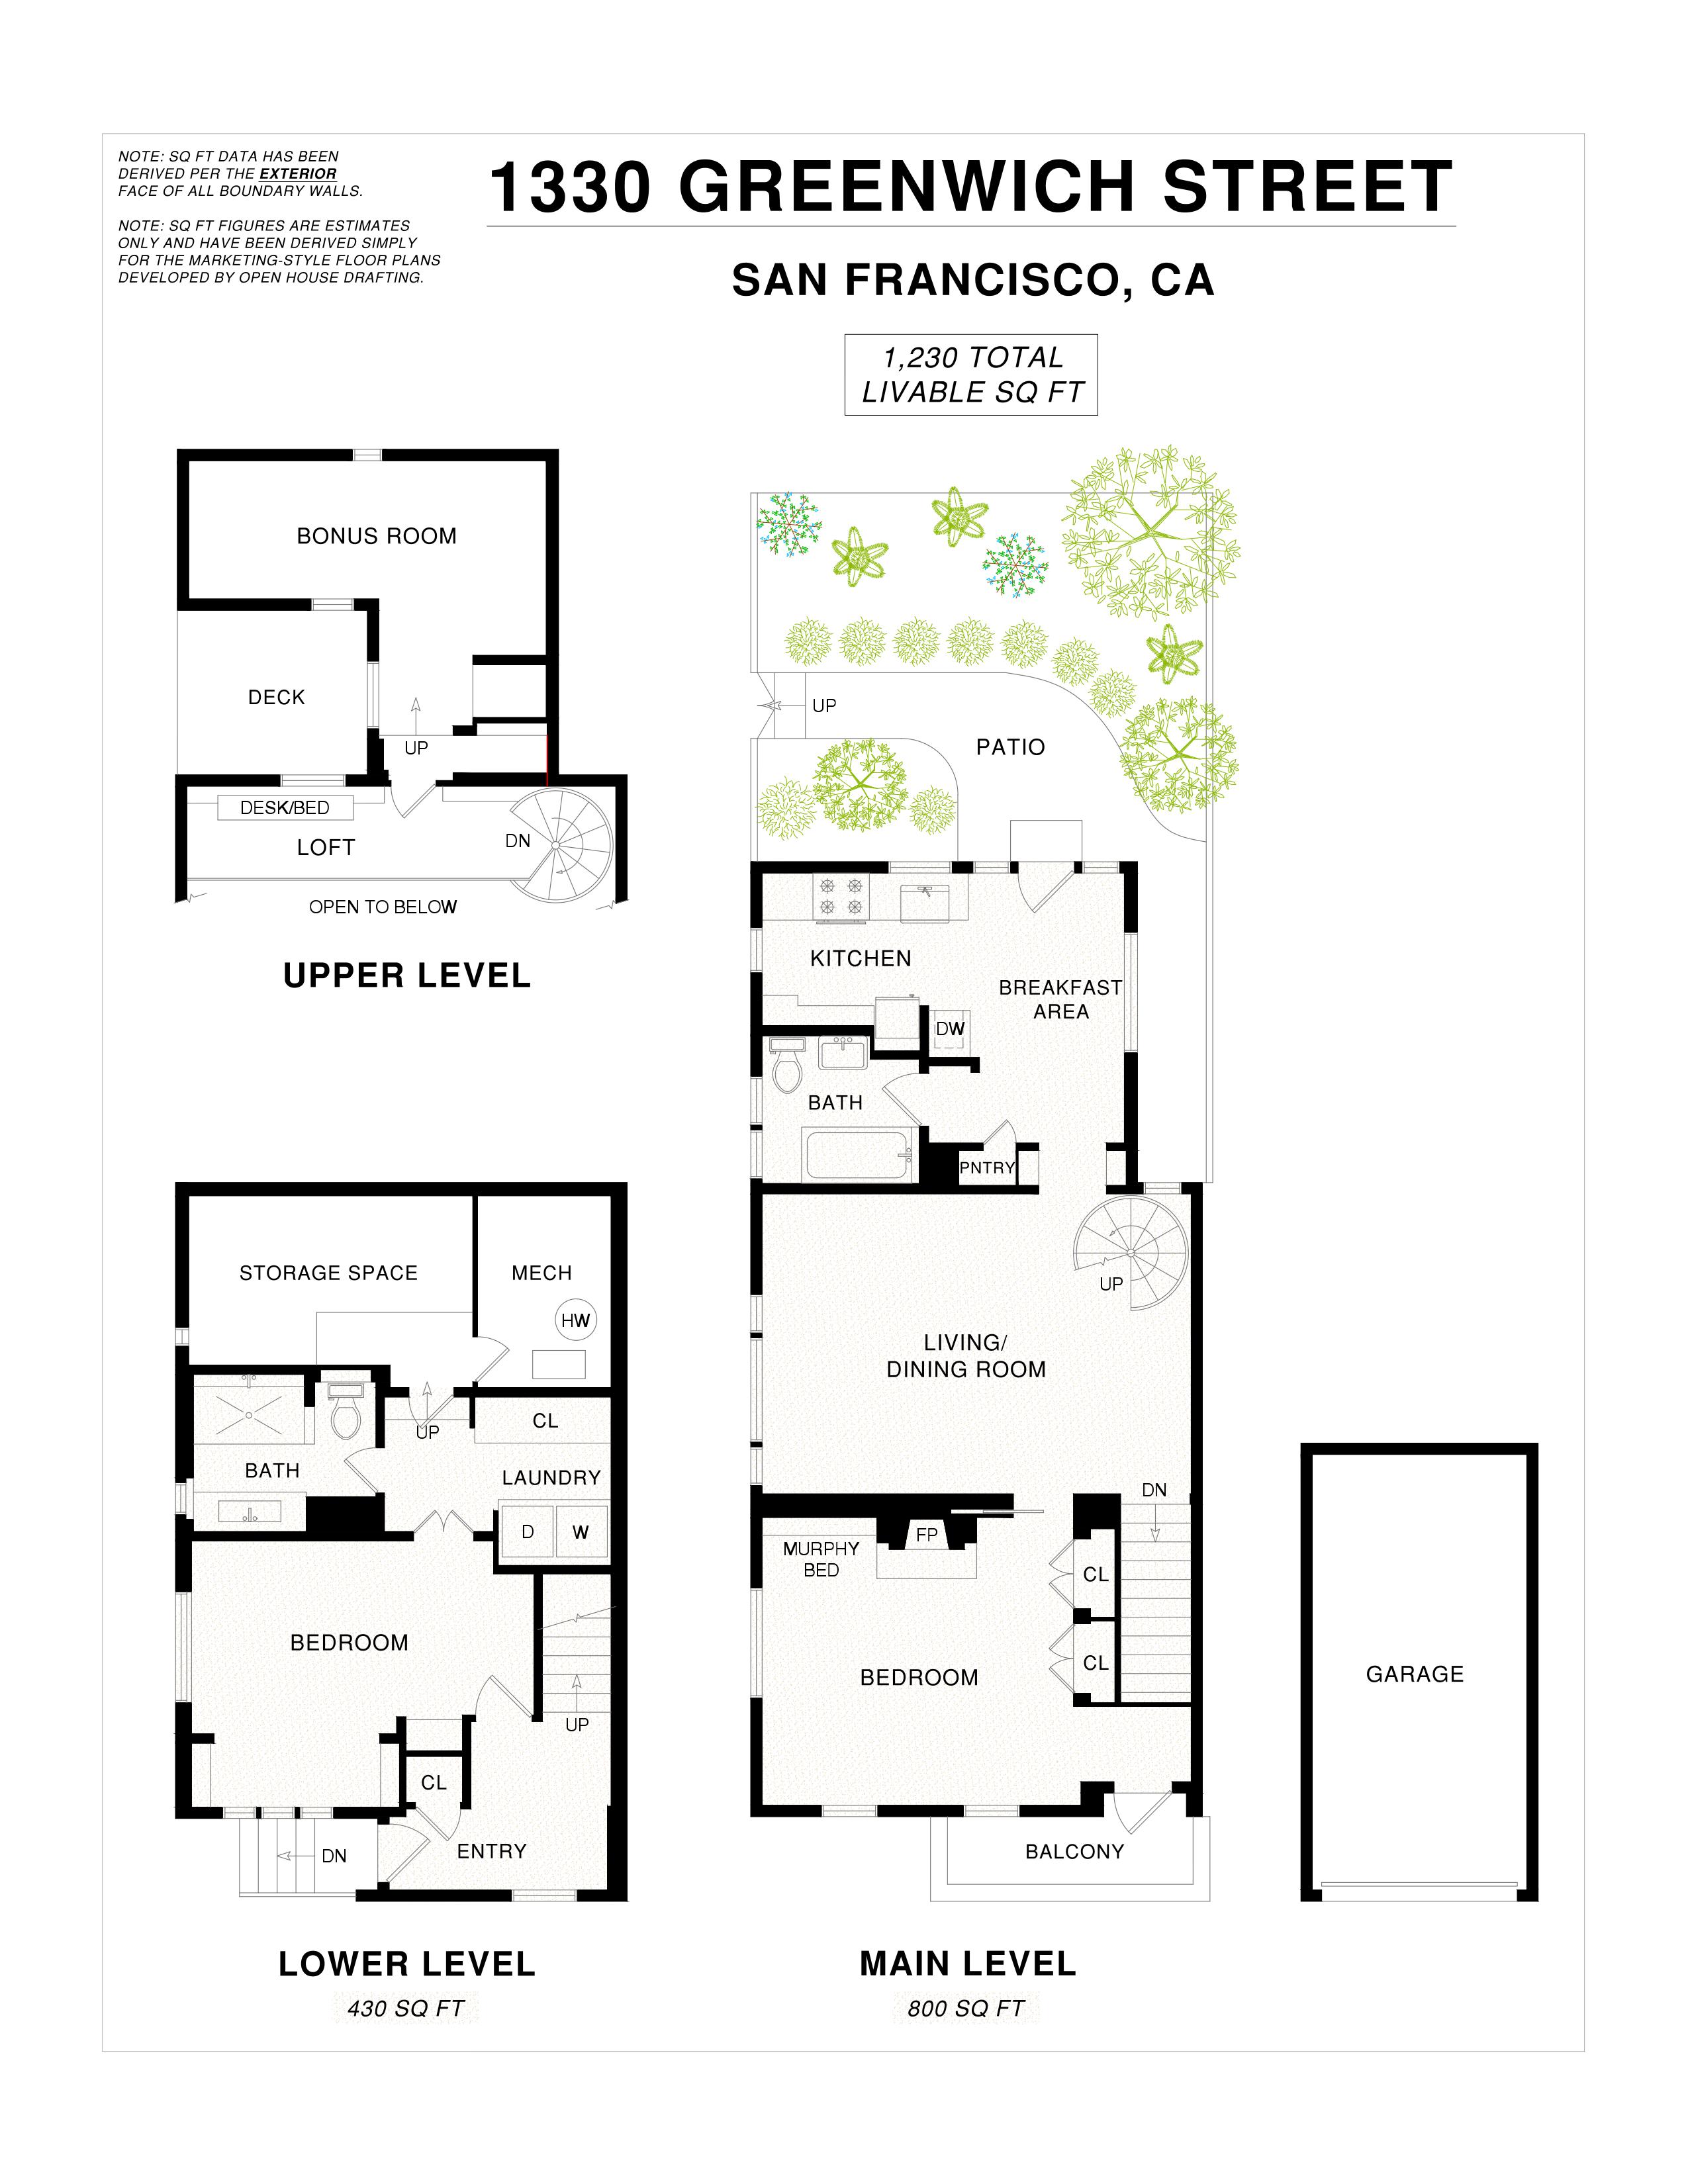 Click to see the floorplan